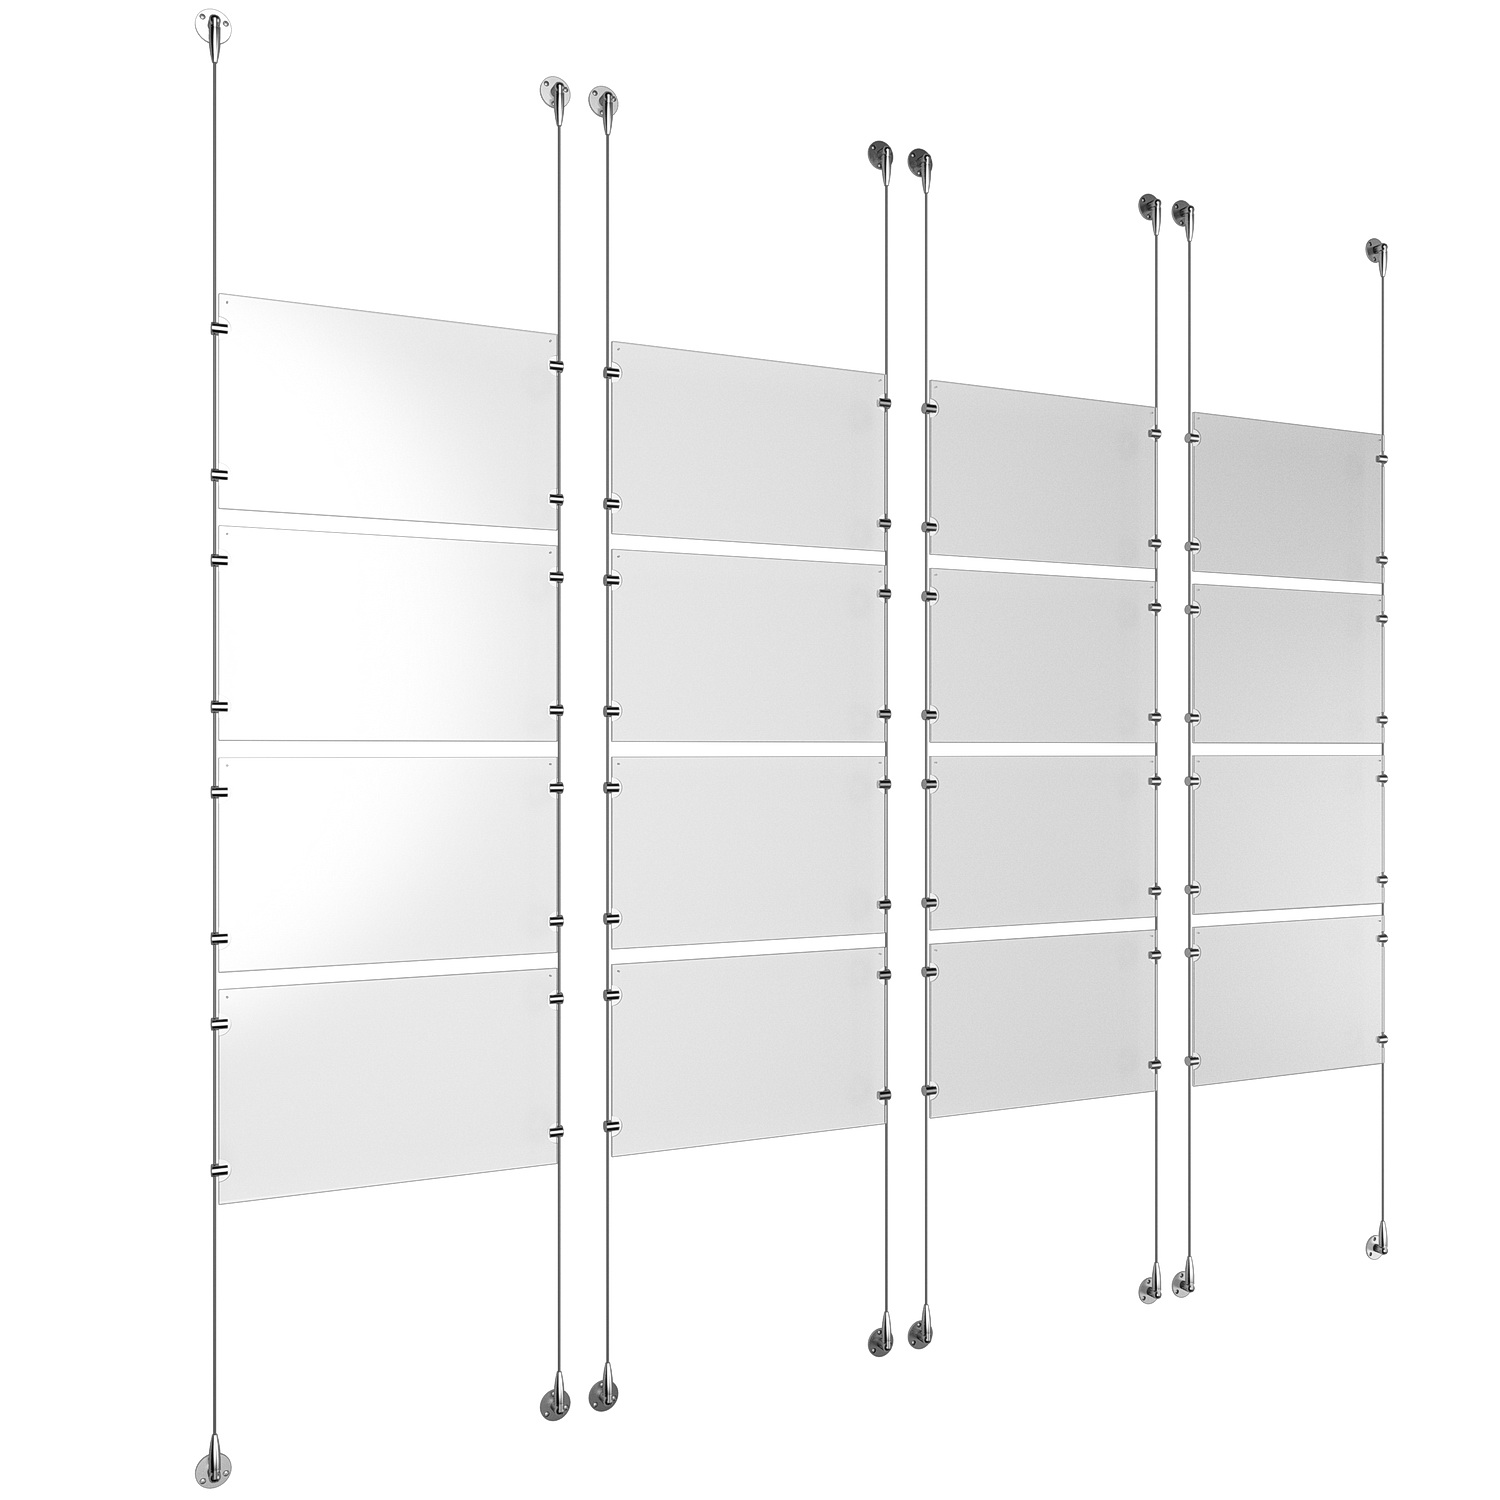 (16) 17'' Width x 11'' Height Clear Acrylic Frame & (8) Stainless Steel Satin Brushed Adjustable Angle Signature 1/8'' Cable Systems with (64) Single-Sided Panel Grippers